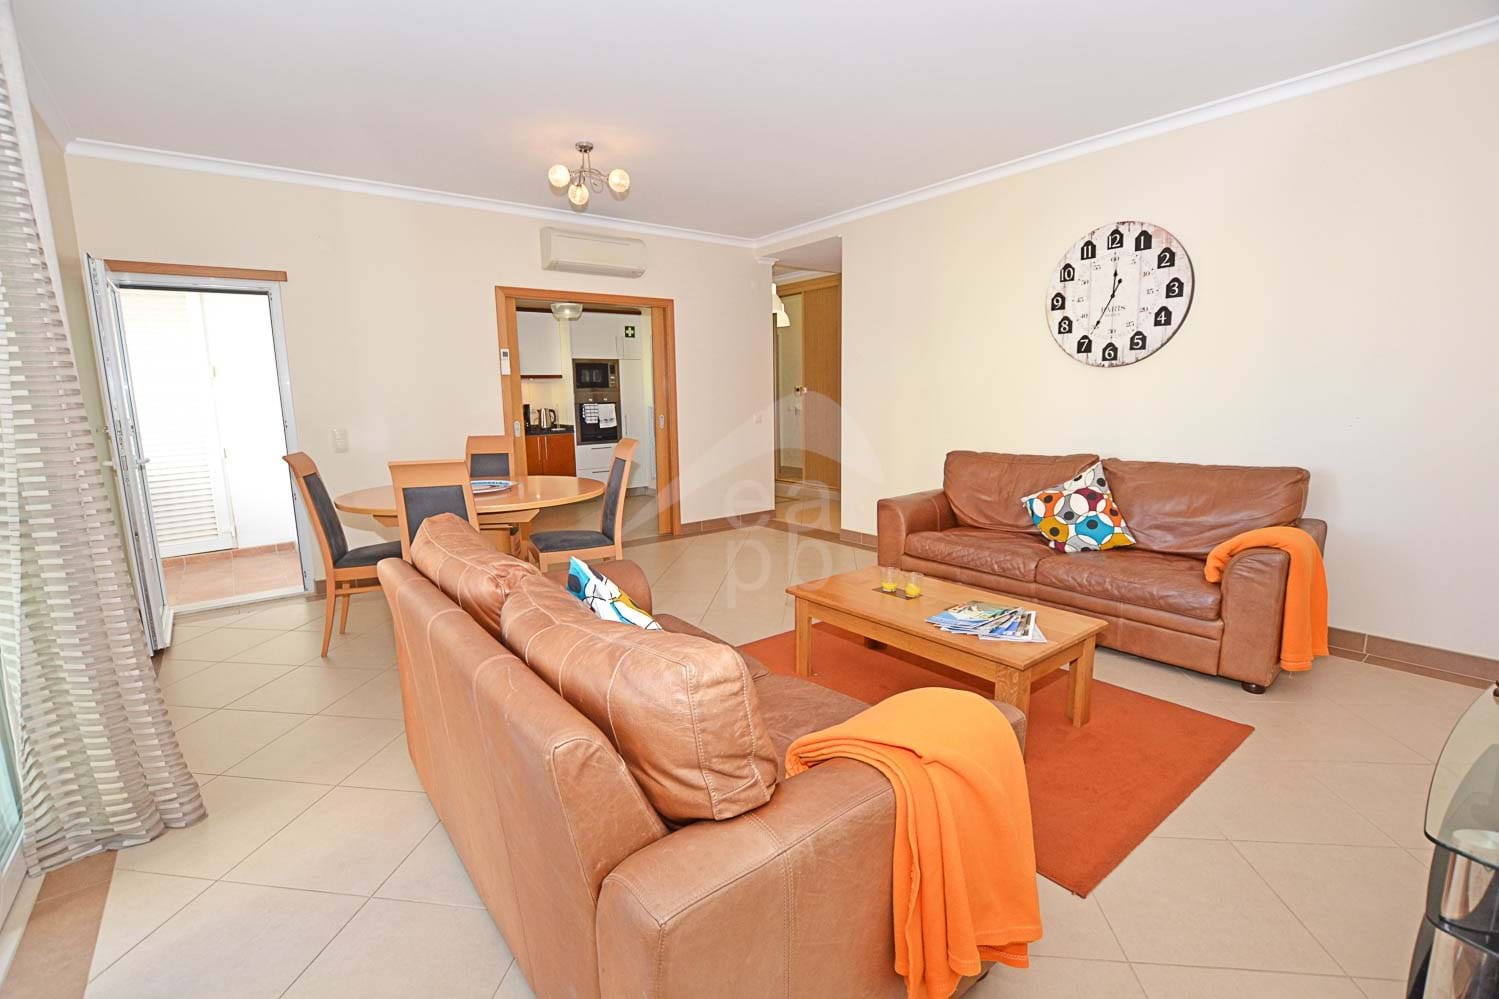 Modern Two Bedroom Apartment with Swimming Pool and Garage in a popular resort in Cabanas